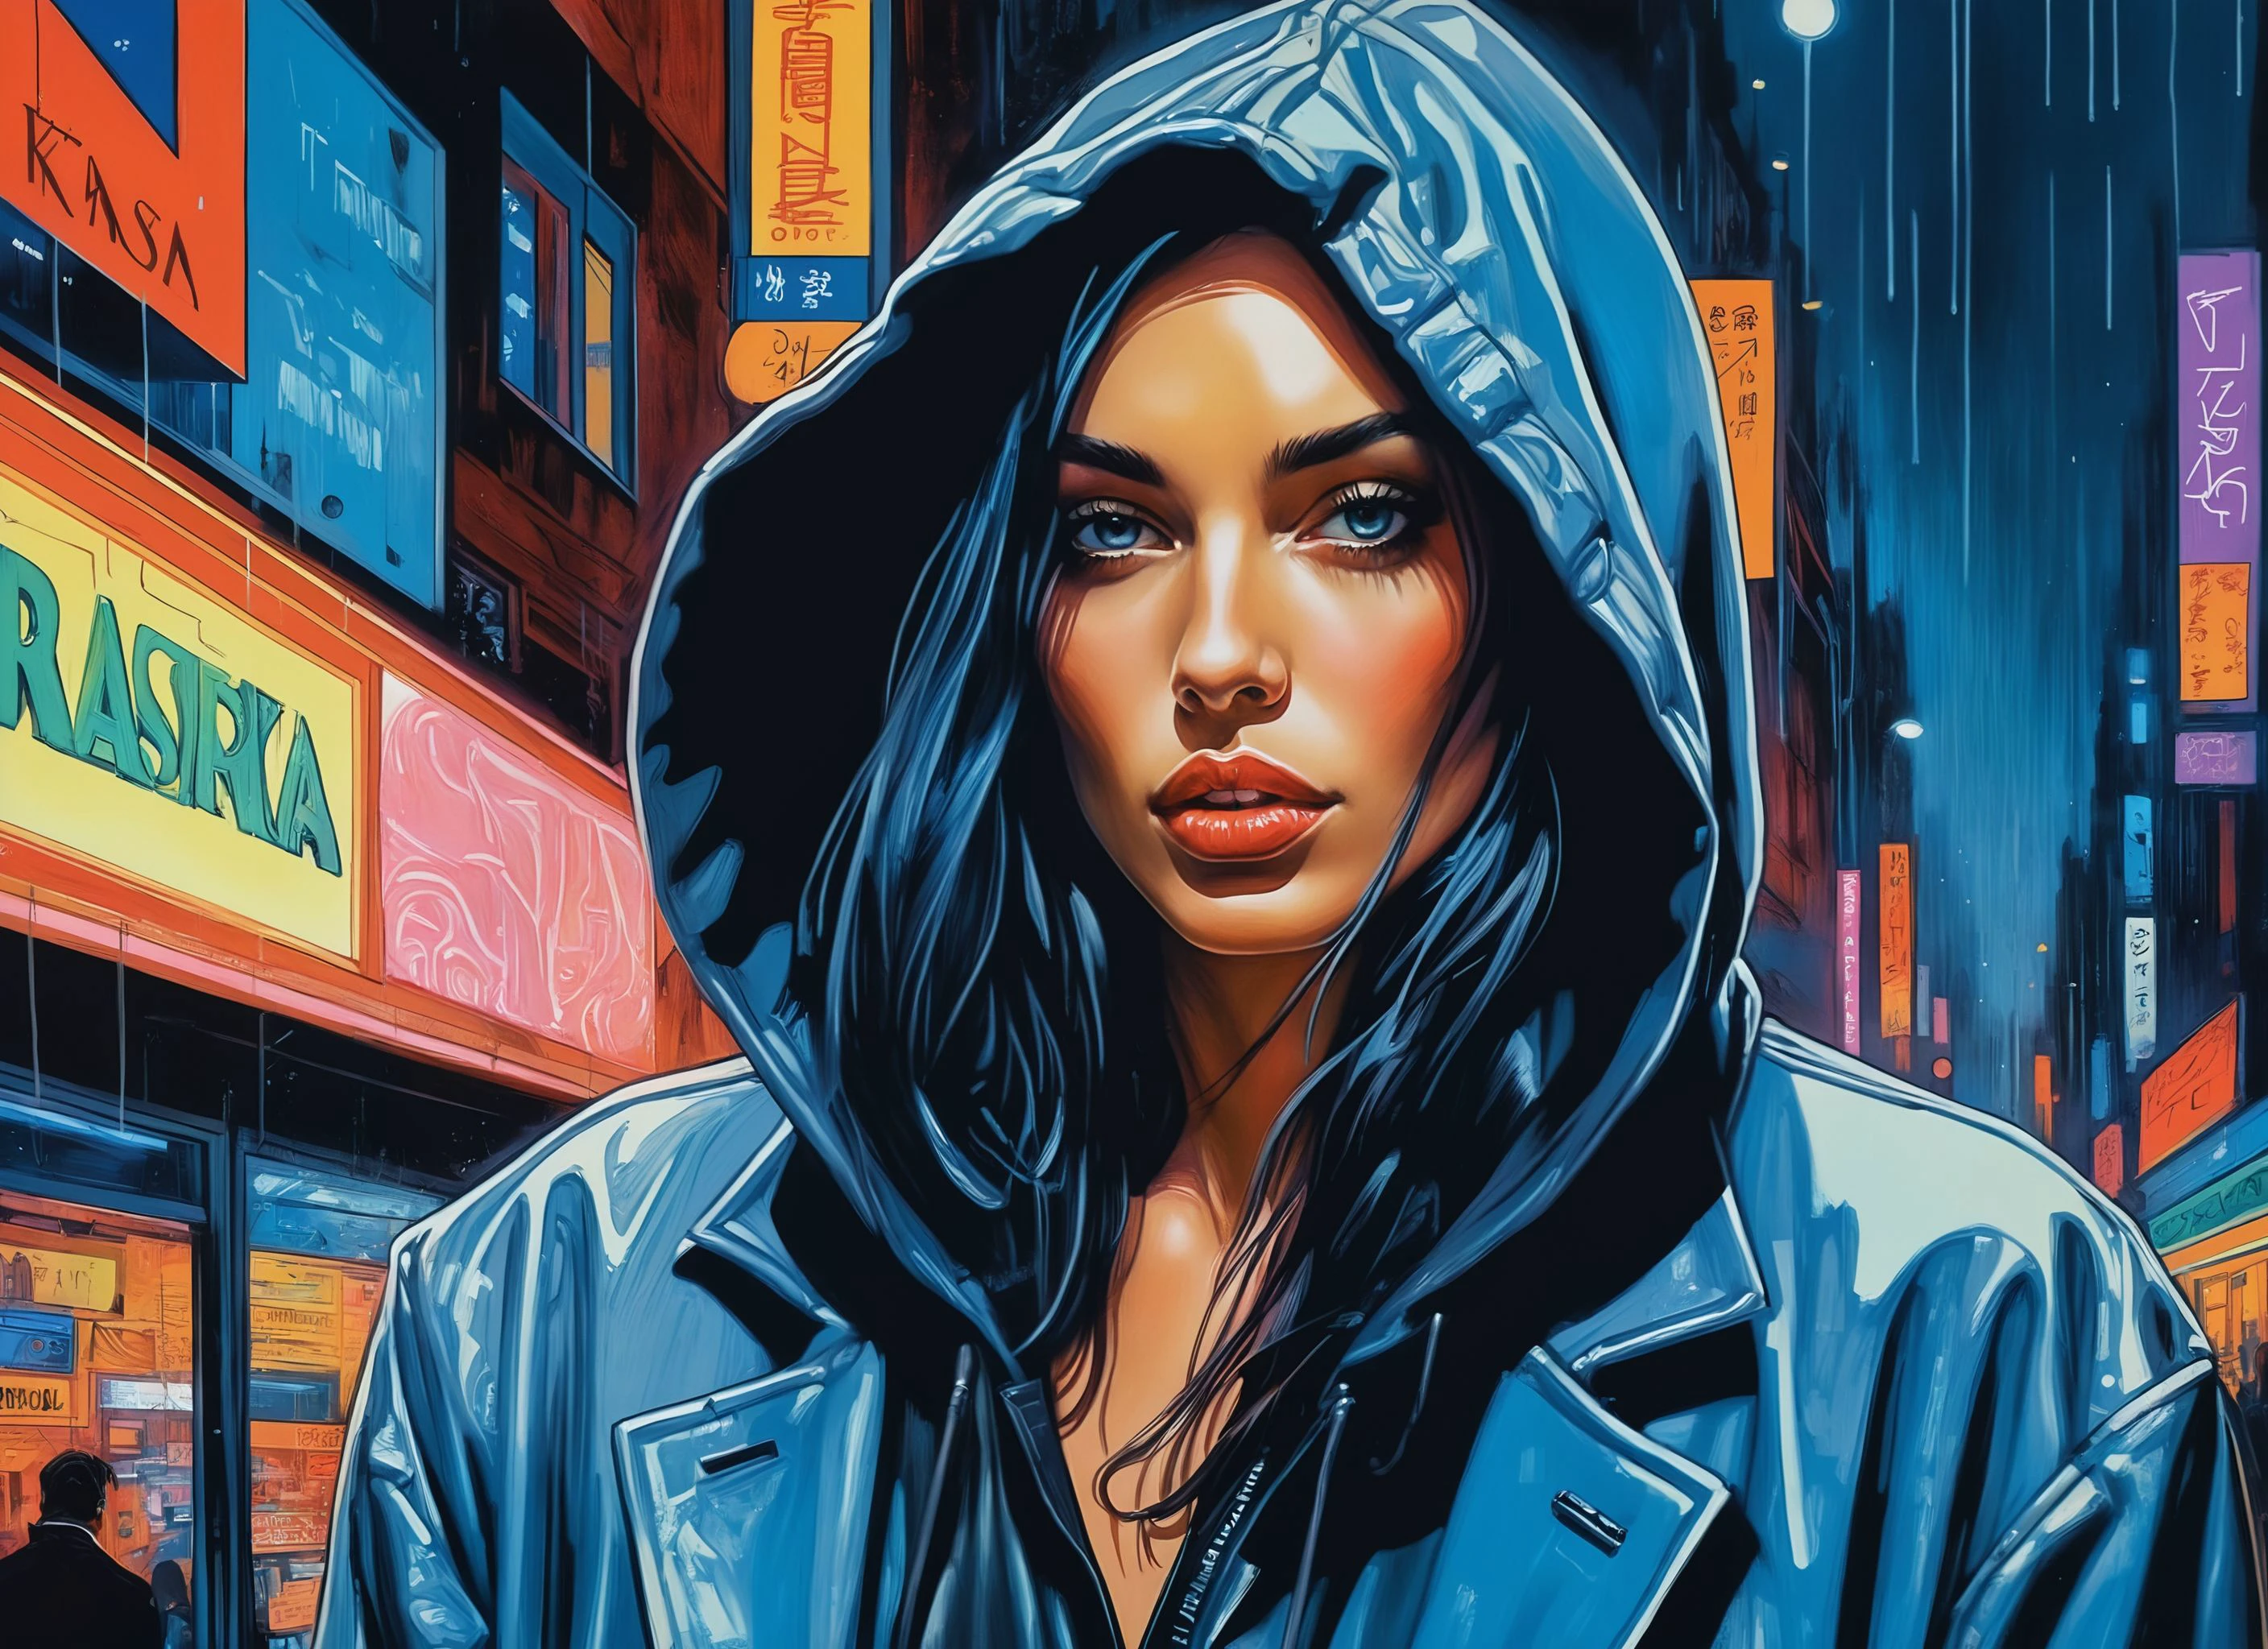 (a girl with a beautiful face), nighttime, cyberpunk city, dark, raining, neon lights ((,Wearing a blazer over a hoodie)), blazer, hoodie, (pastel colors ,Neon Night), cyberpunk, synthwave, 1980s, futurism, brutalism, neuromancer, cinematic photo in a grocery store, ((art by Philip de Koninck)),art by enki bilal, art by philippe druillet, art by moebius, inspired by french comics art,Pastels, Chiaroscuro,Background is stunning 17th century european village scenery, detailed and intricate environment, oil painting, palette knife soft brushstrokes, heavy strokes, dripping paint, art station on trend, sharp focus, intricate details, highly detailed